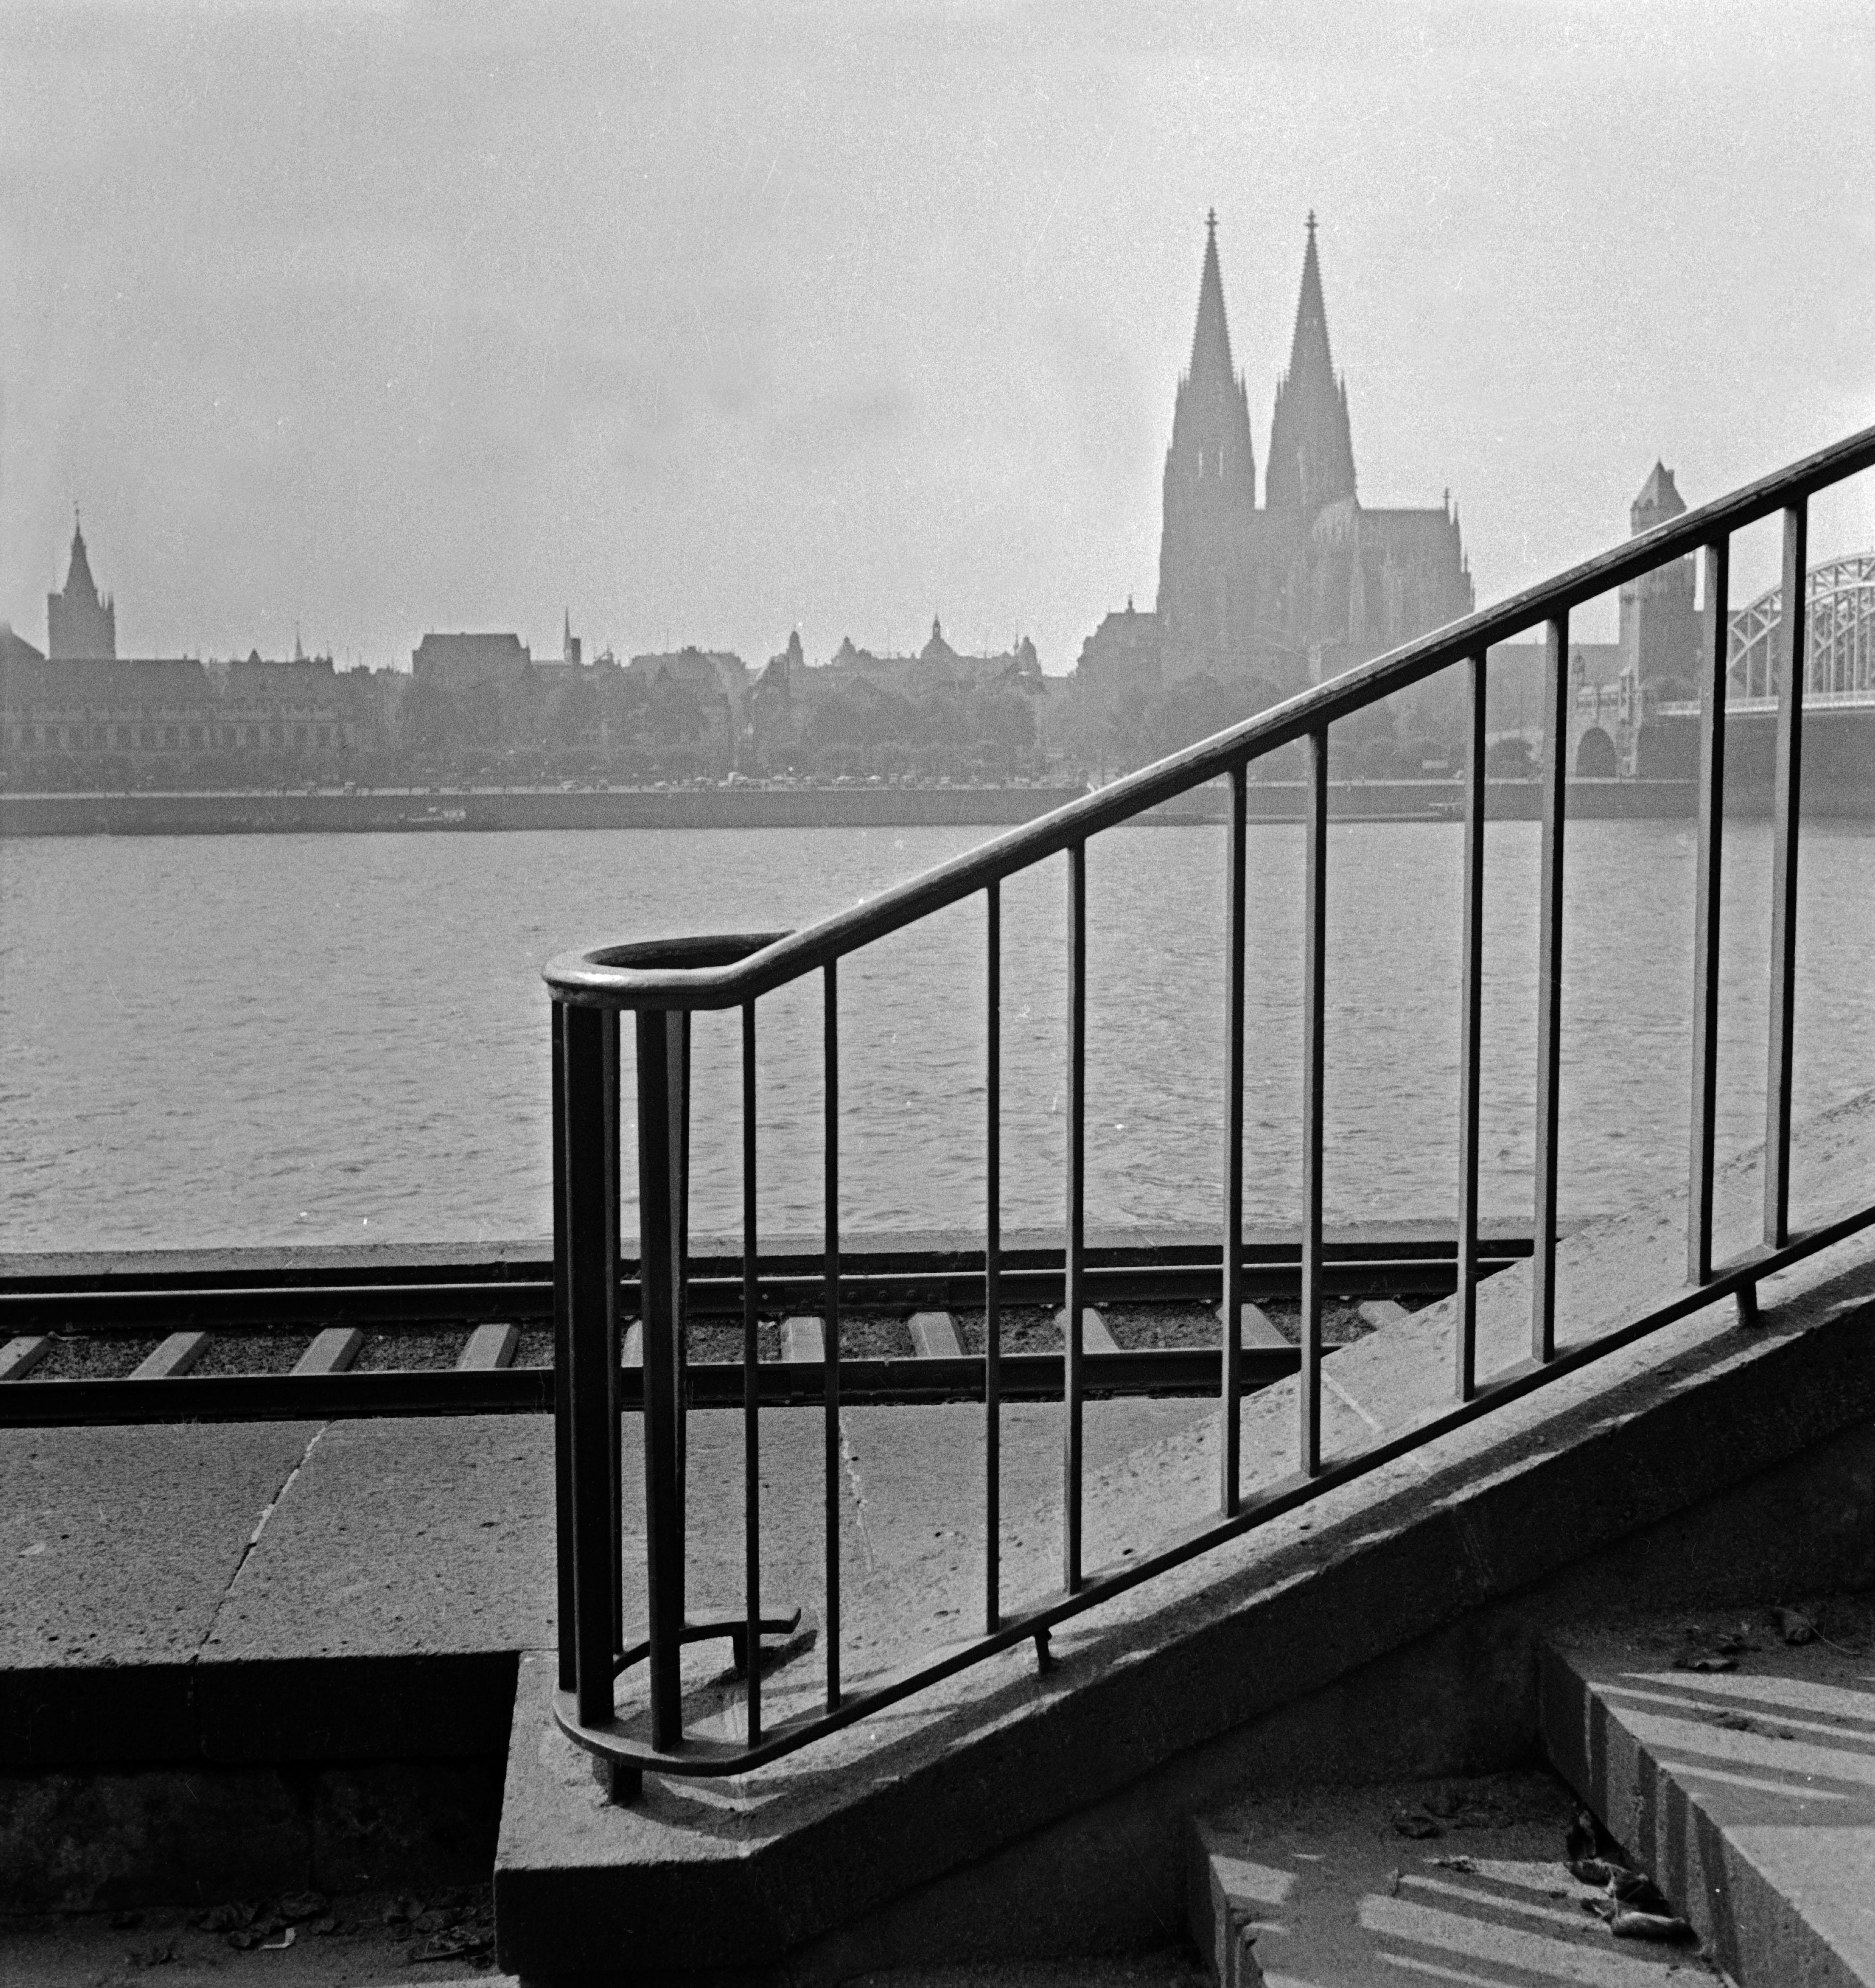 Karl Heinrich Lämmel Black and White Photograph - Cologne, Germany 1935, Printed Later